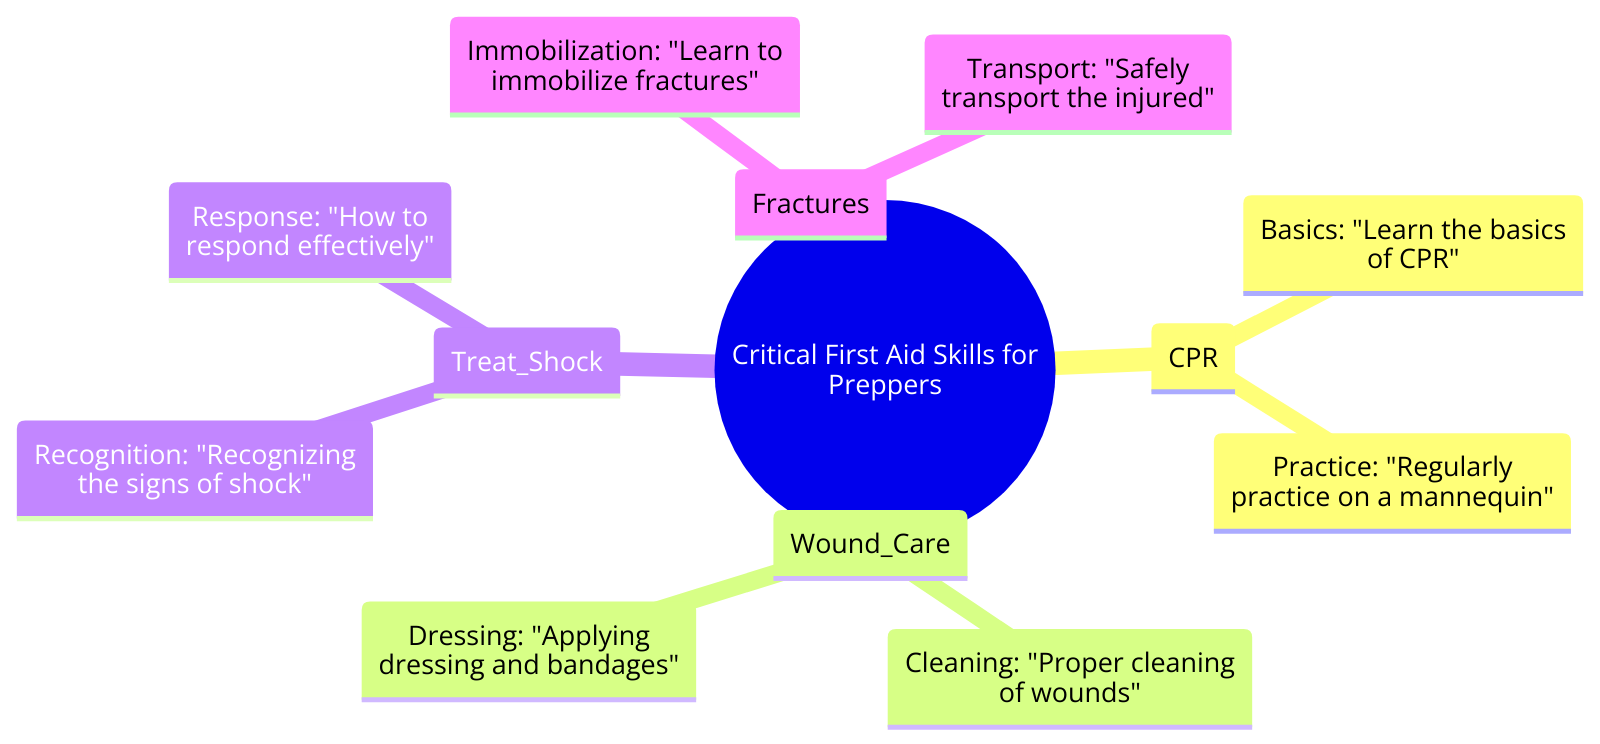 diagram illustrating the critical first aid skills every prepper should know, including CPR, wound care, and how to treat shock